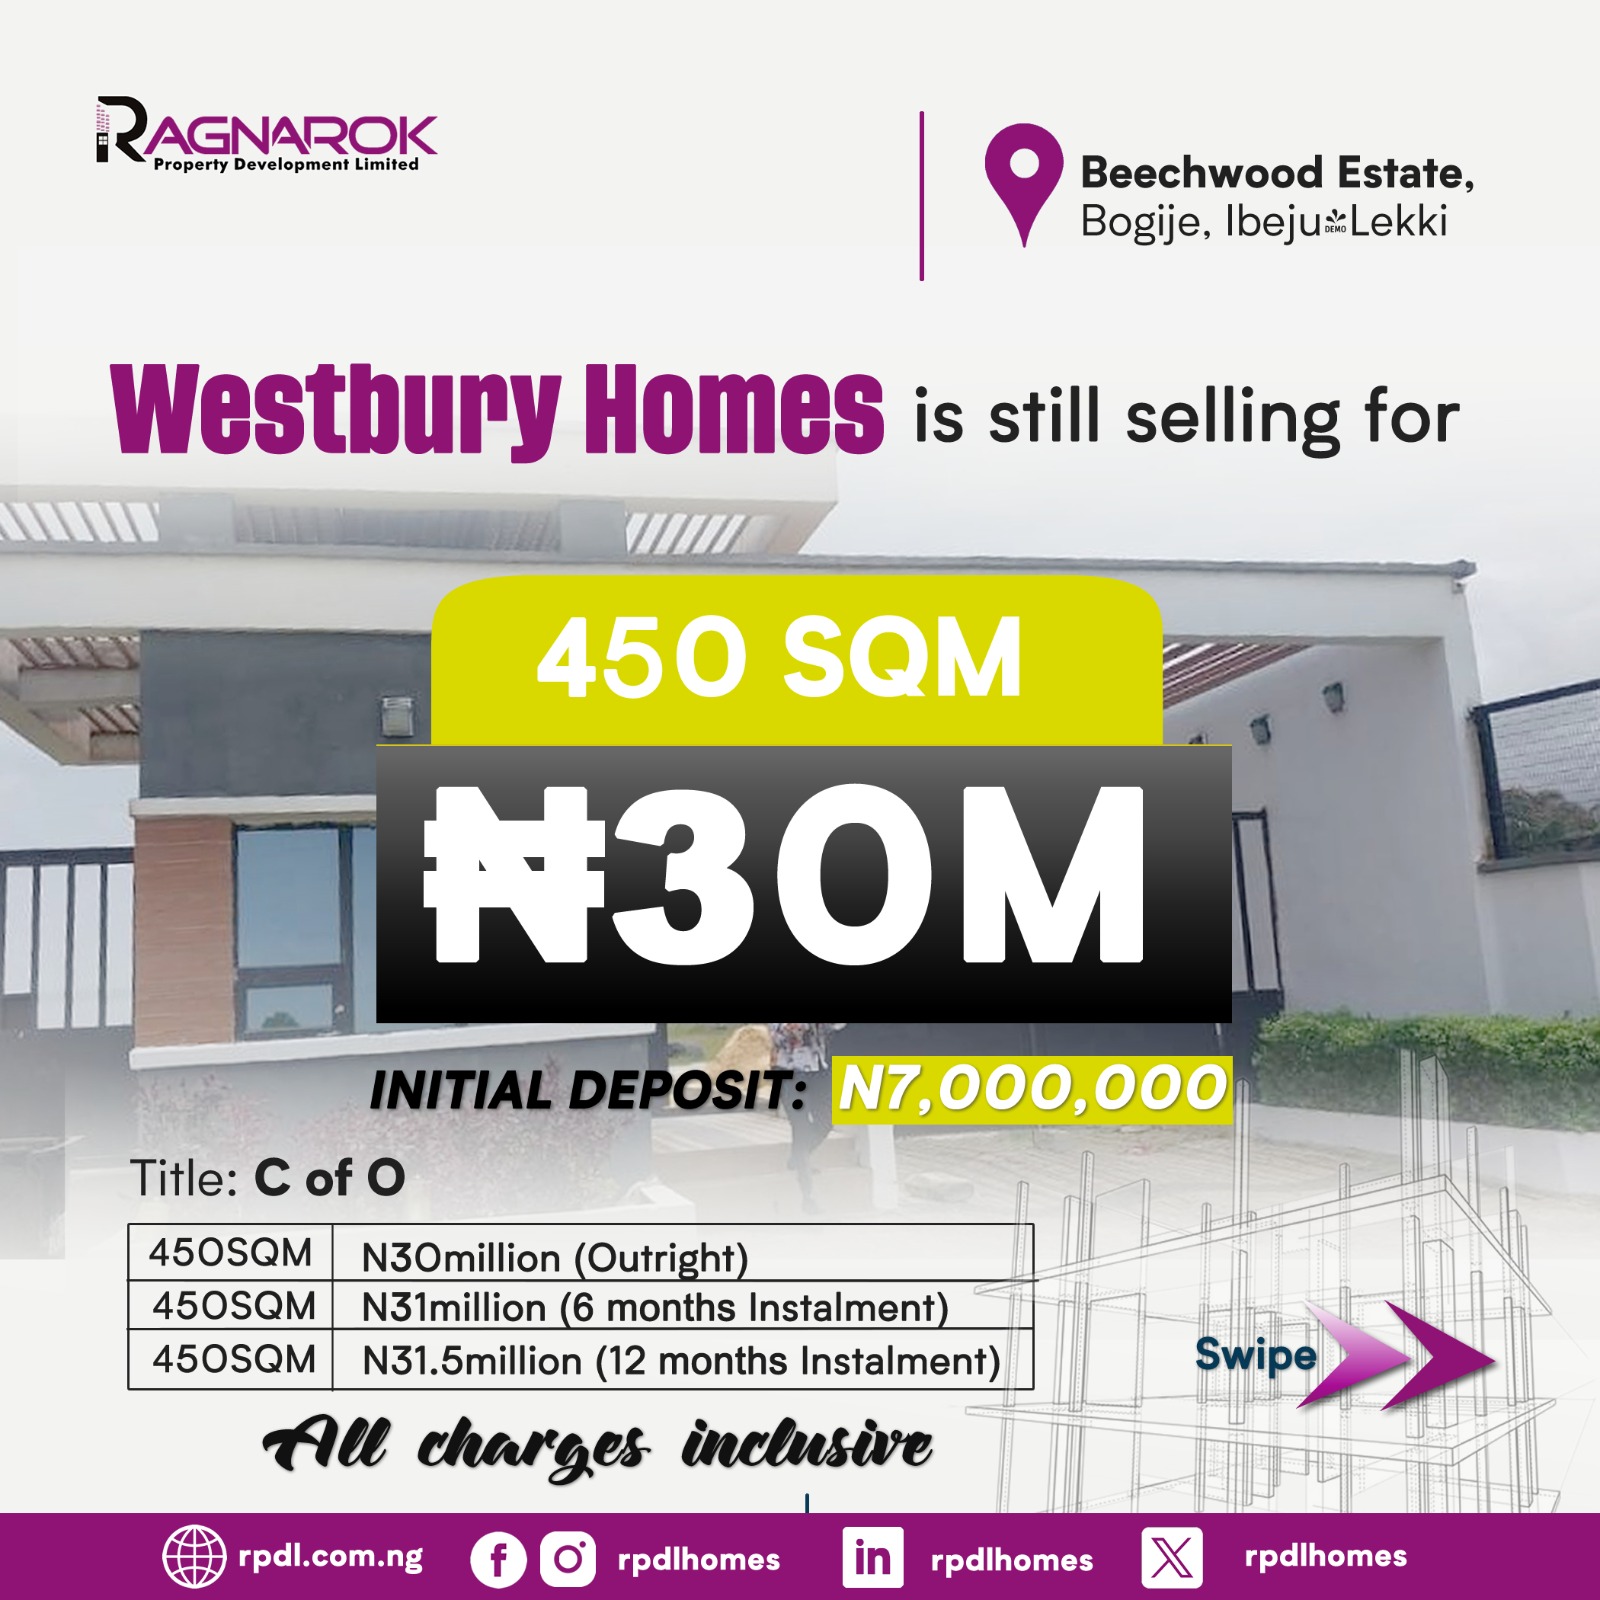 Westbury Homes which is a 100 % DRY land located inside Beachwood Estate. It is an estate inside another estate thereby increases the security level.